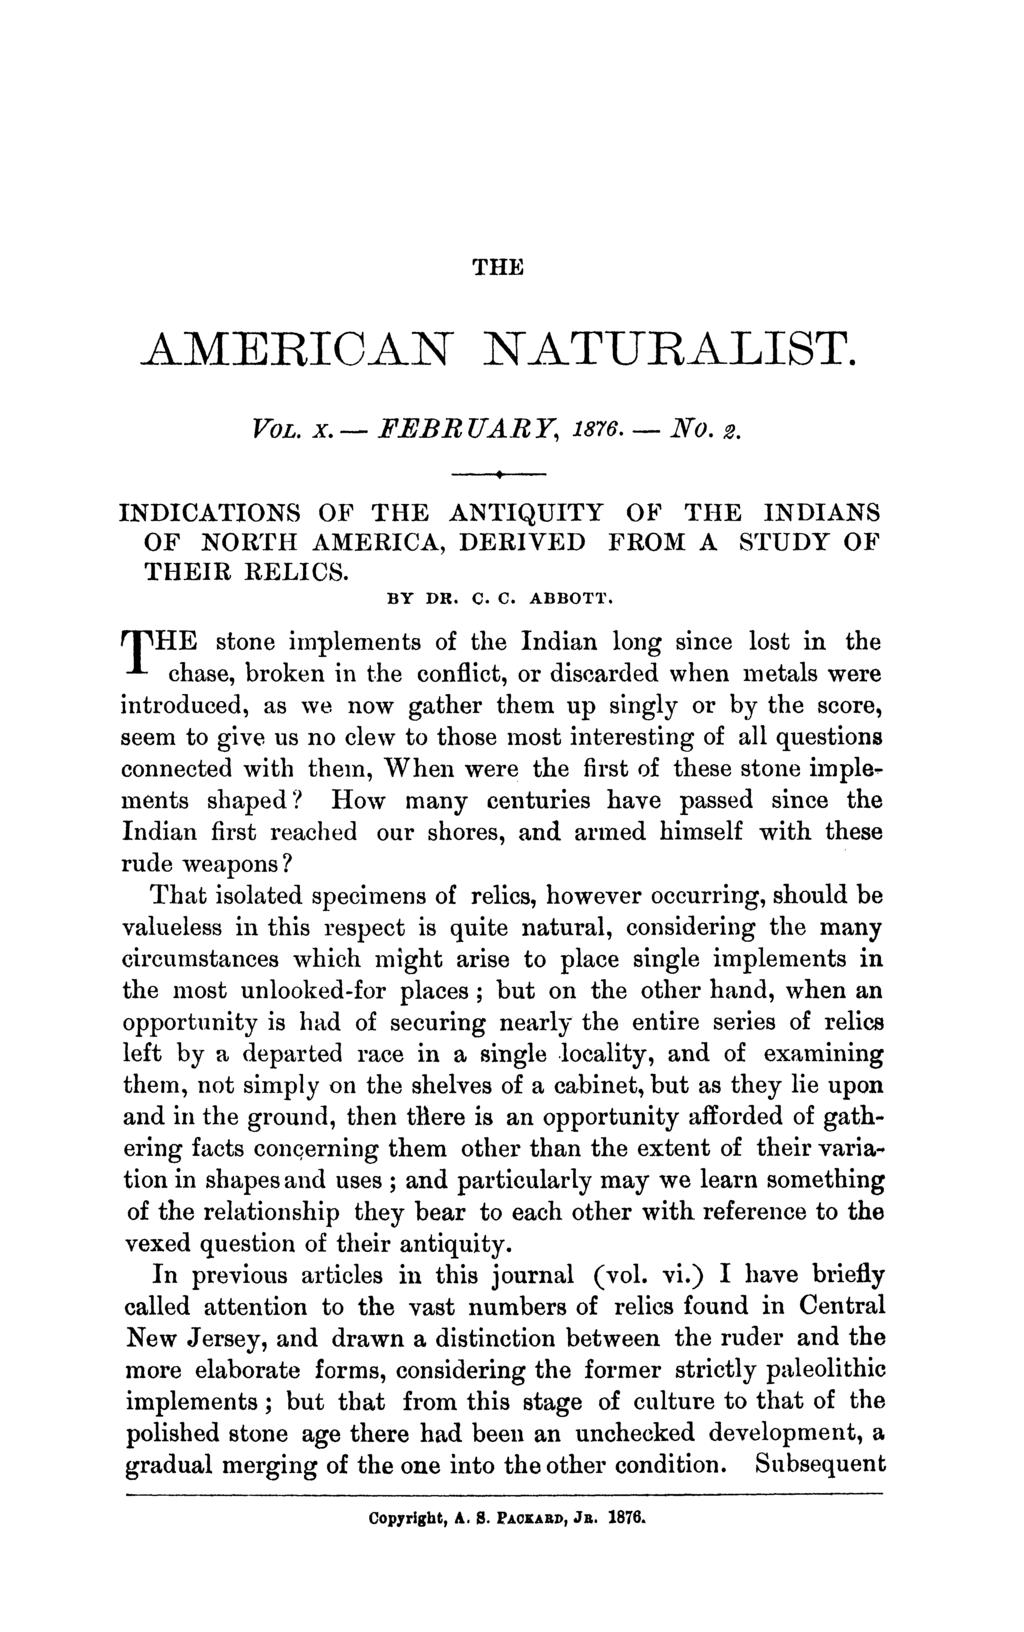 THE AMERICAN NATURALIST. VOL. x. - FEBB UARY, 1876. - No. 2. INDICATIONS OF THE ANTIQUITY OF THE INDIANS OF NORTH AMERICA, DERIVED FROM A STUDY OF THEIR RELICS. BY DR. C. C. ABBOTT.